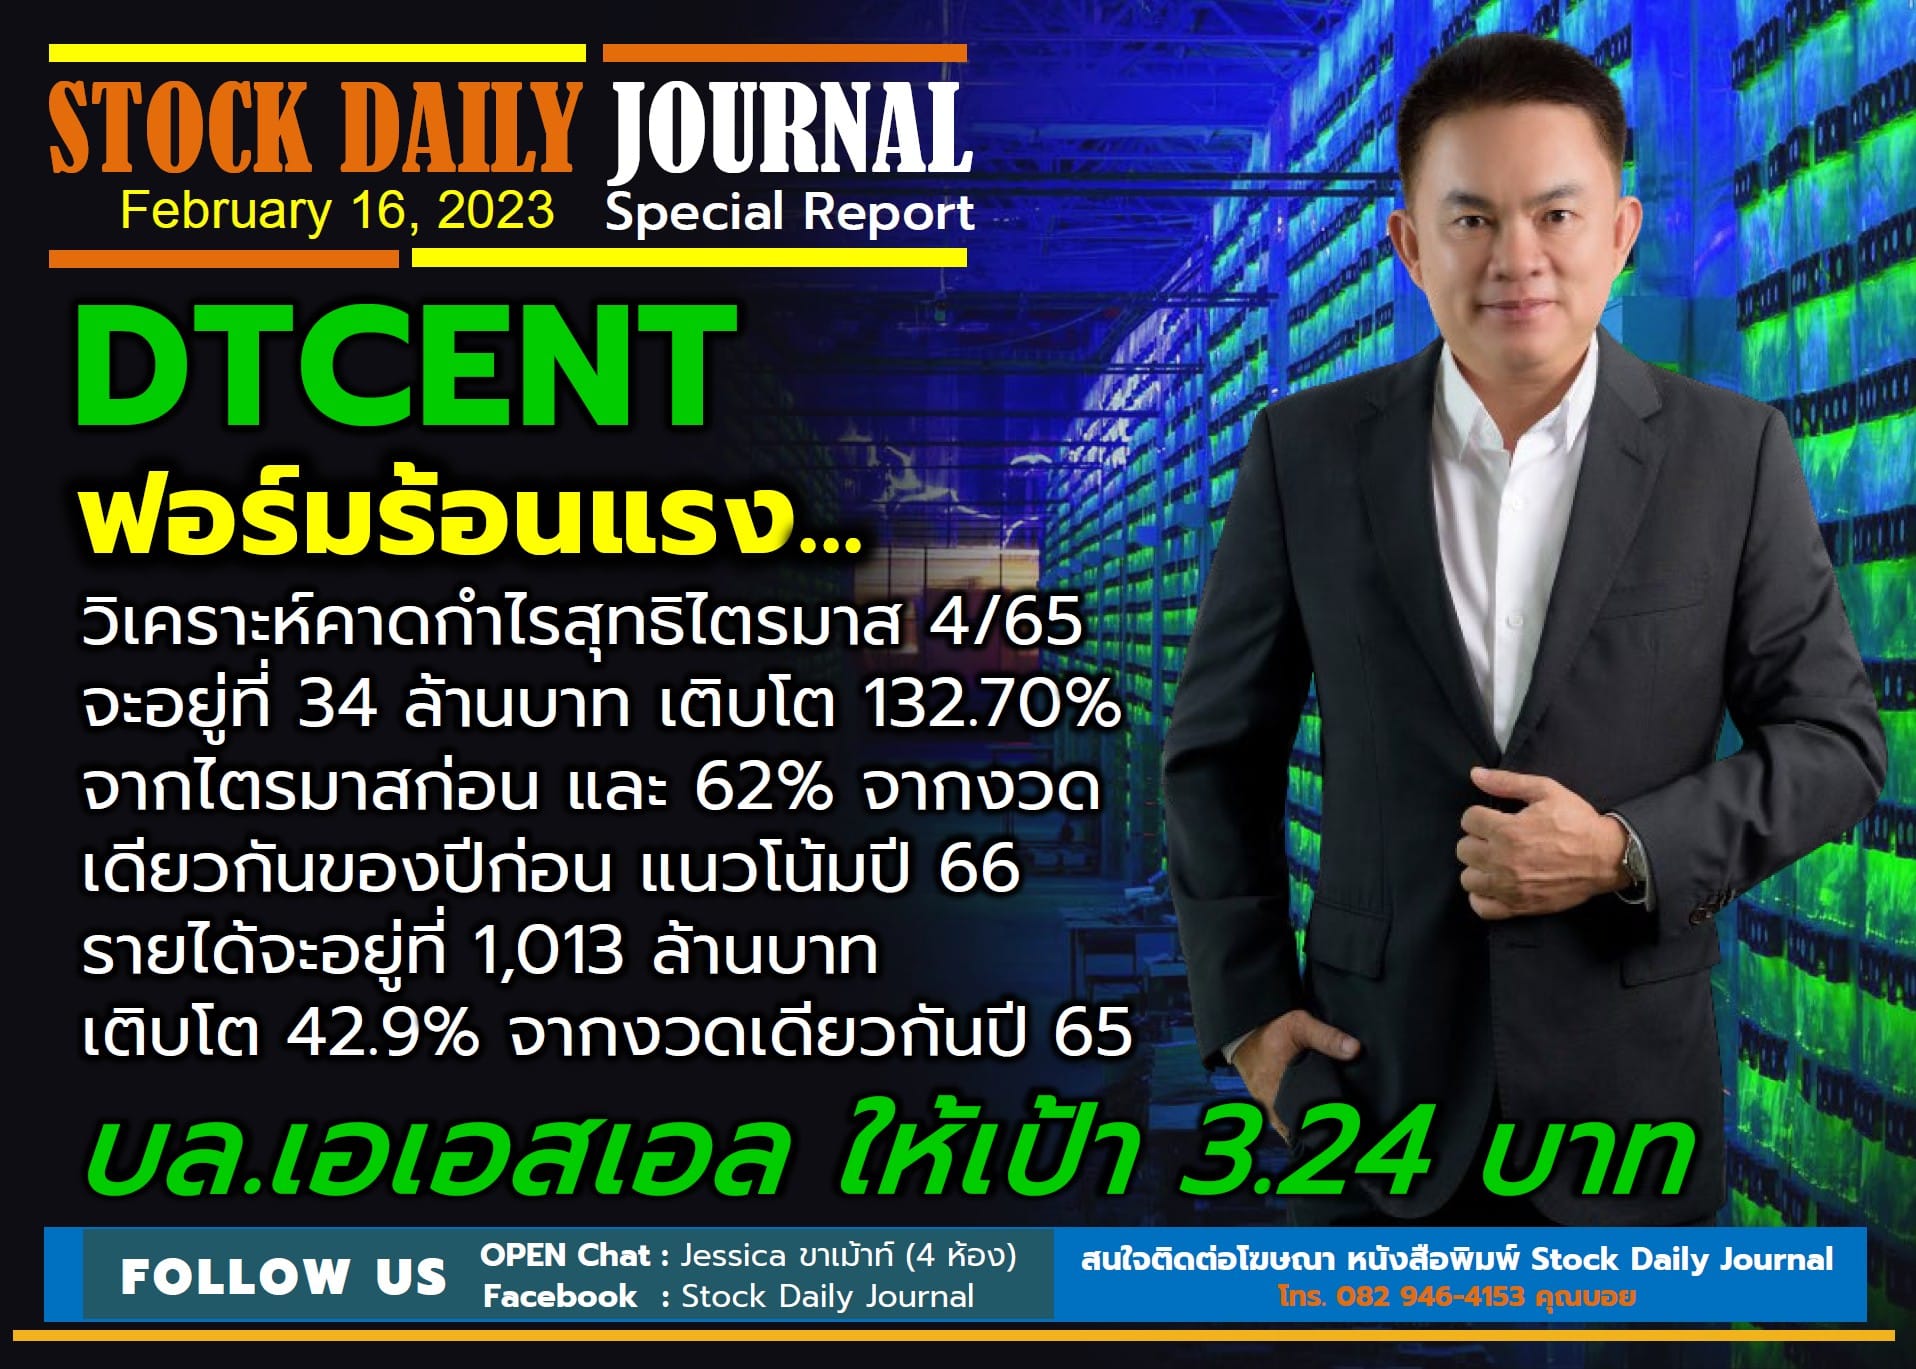 STOCK DAILY JOURNAL “Special Report : DTCENT”